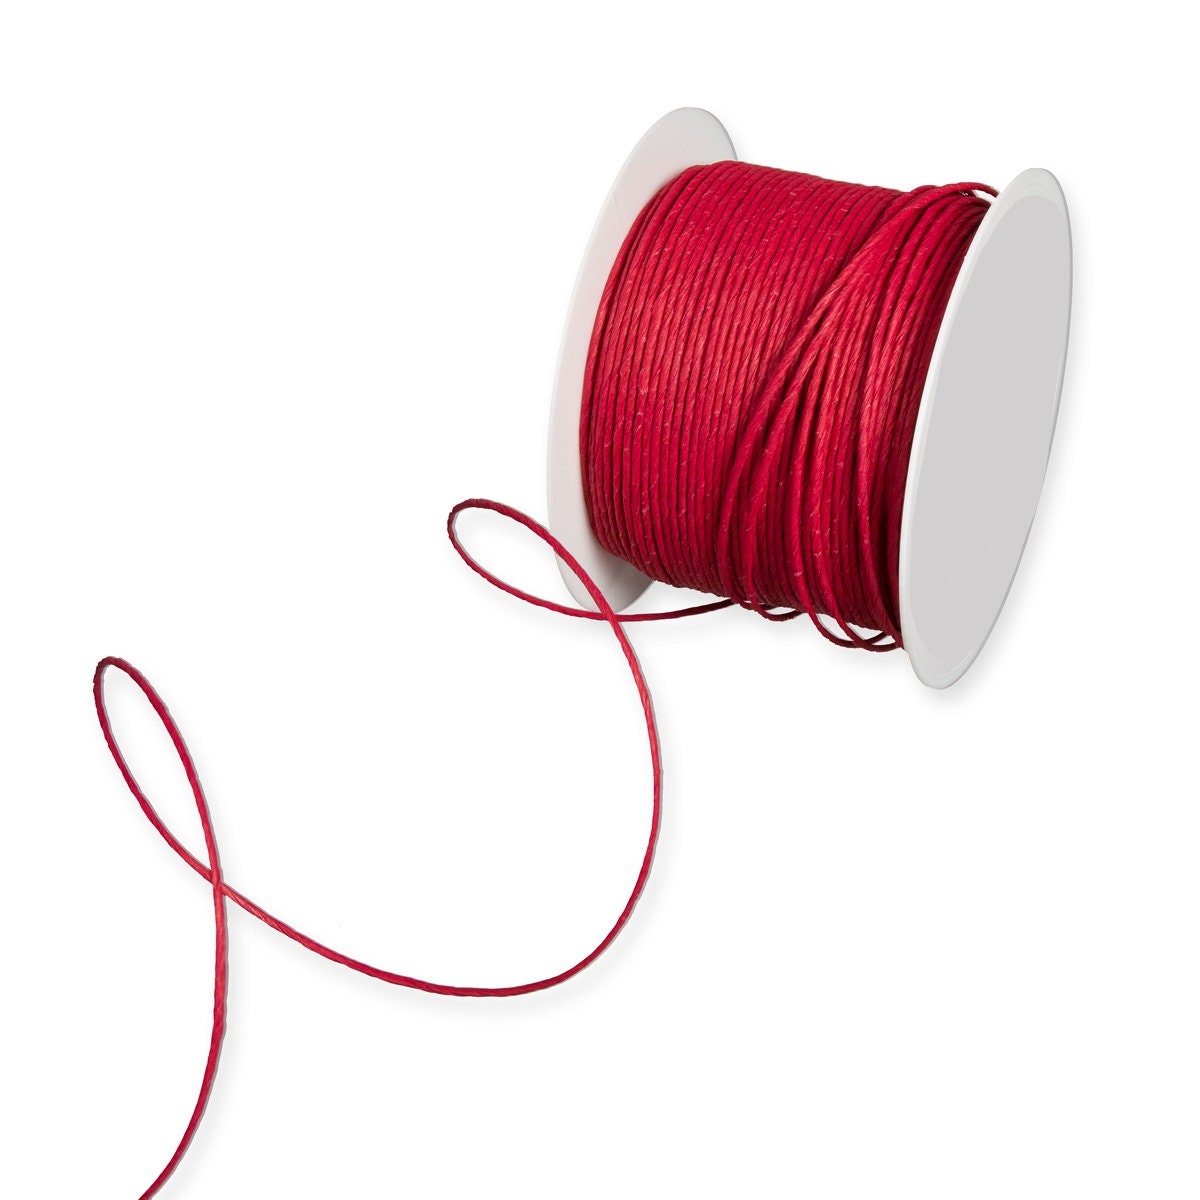 Loop Tie Binding Coated Color Wire for Flowers Wholesale Craft